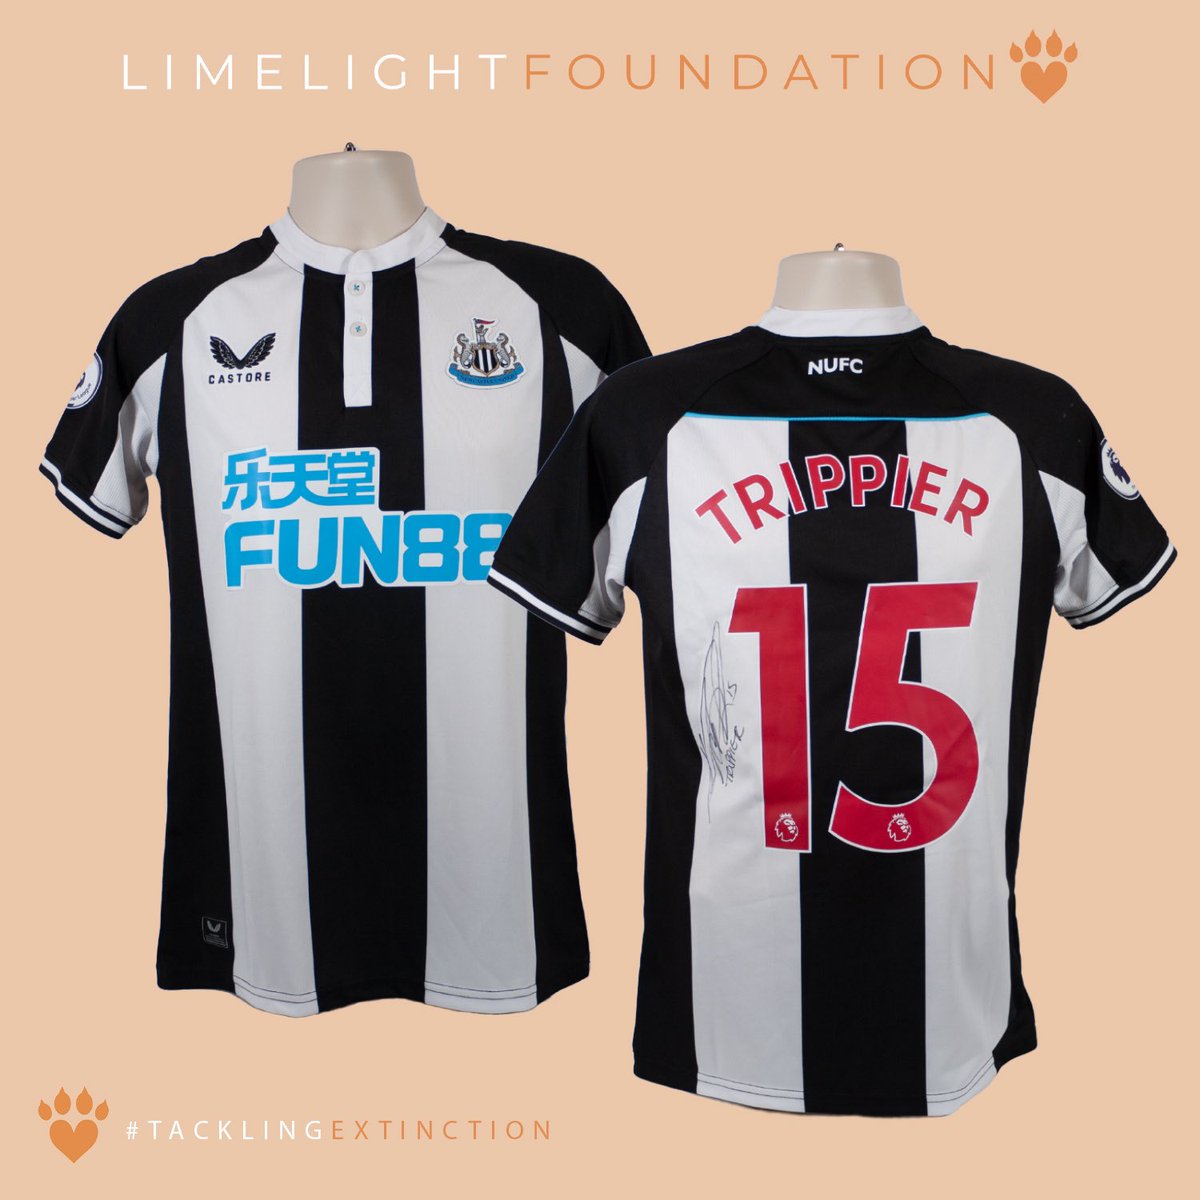 Win a signed @trippier2 @NUFC shirt at The Limelight Foundation with all proceeds going towards wildlife conservation 🌍🐾 Visit @TheLimelightFDN website for a chance to win!⚫️⚪️ #TacklingExtinction #newcastleunited #nufc #football #trippier #kierantrippier #newcastle @NUFC360